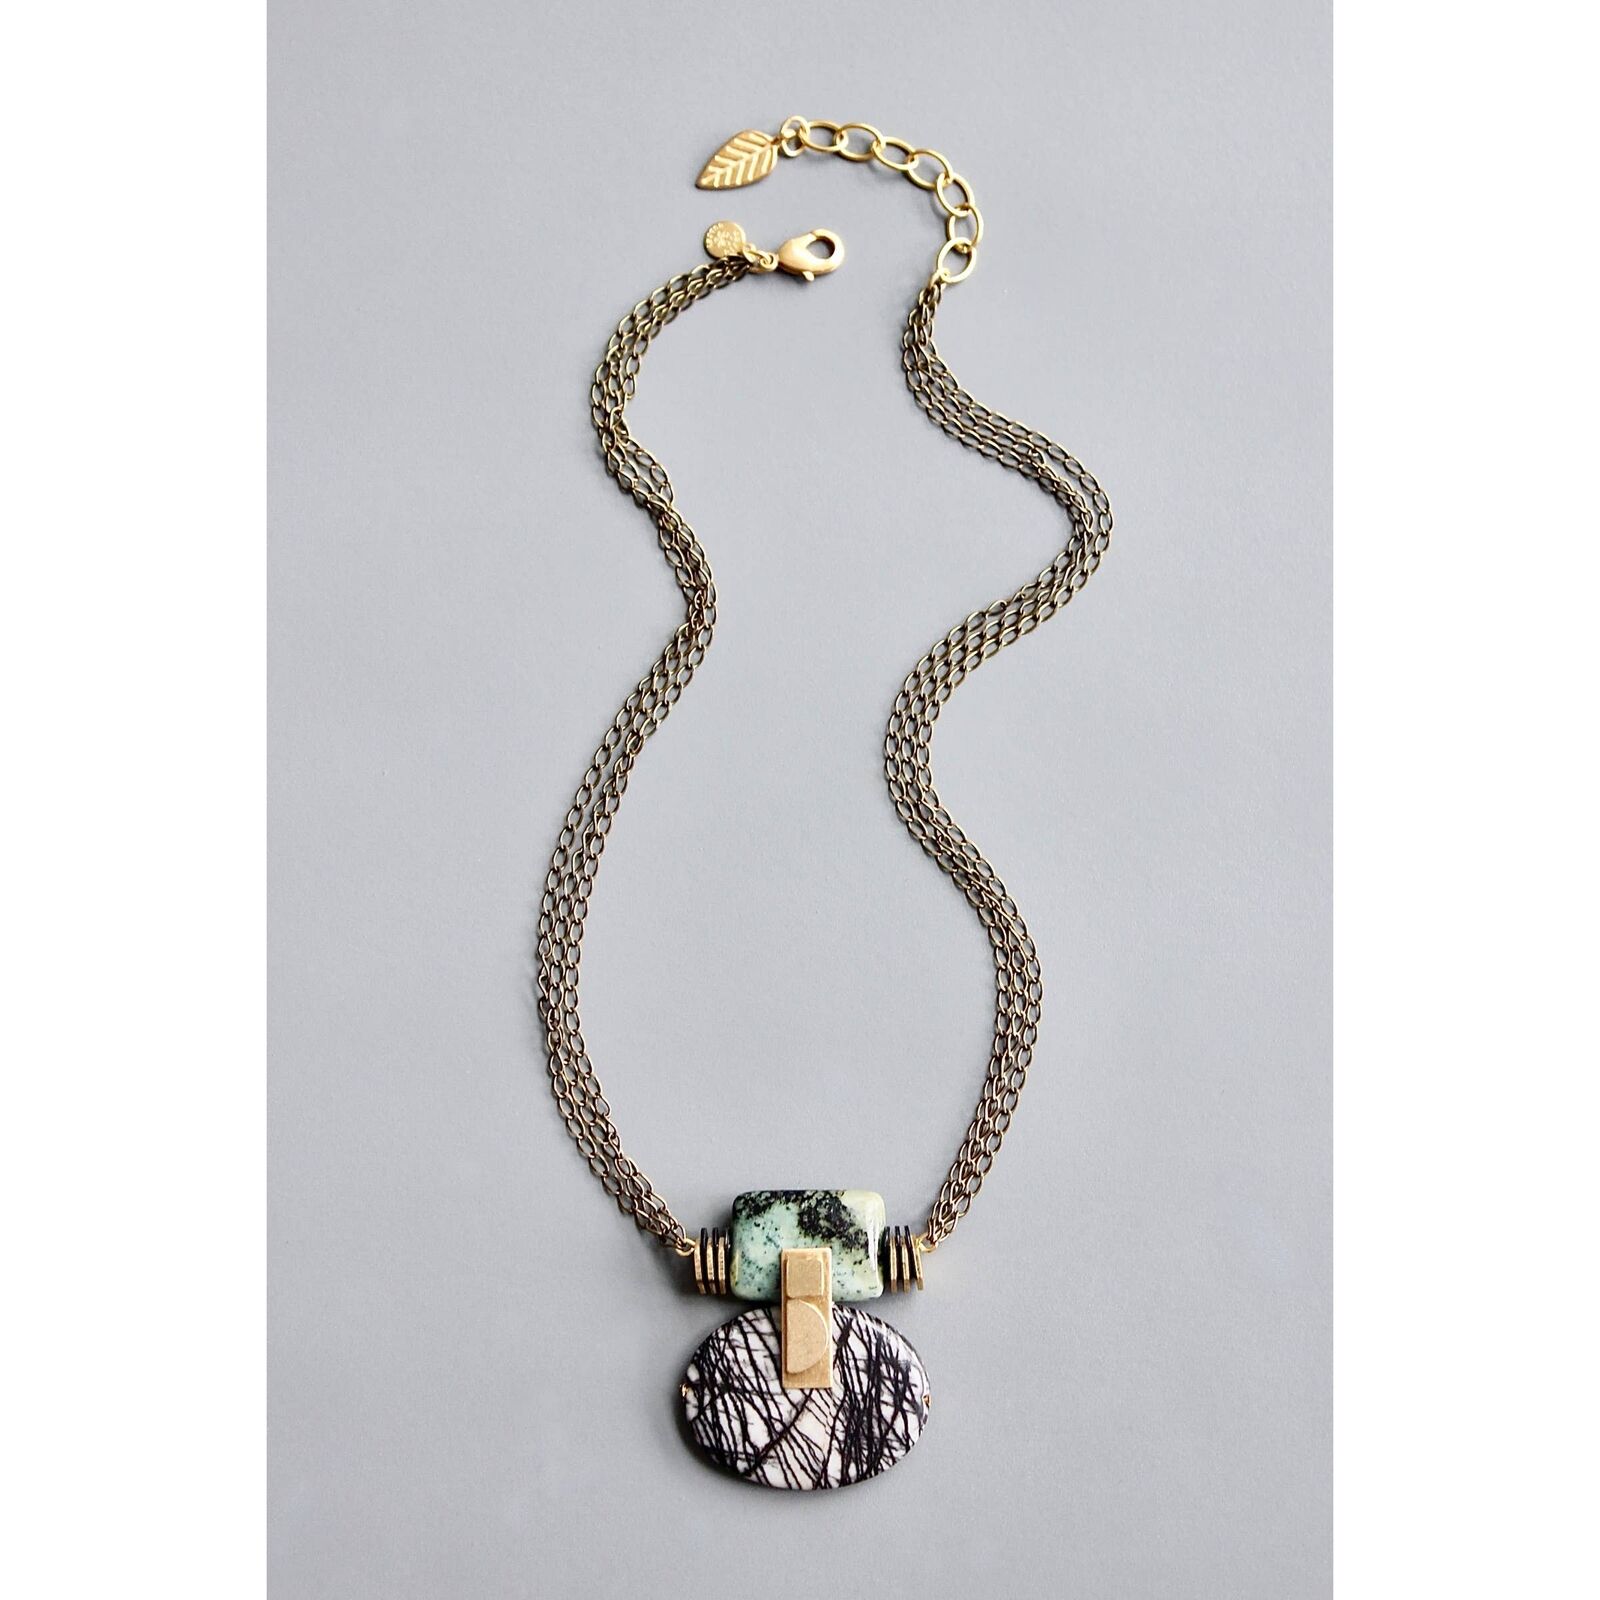 Jasper and Chain Art Deco Necklace with Oxidized Brass - 17